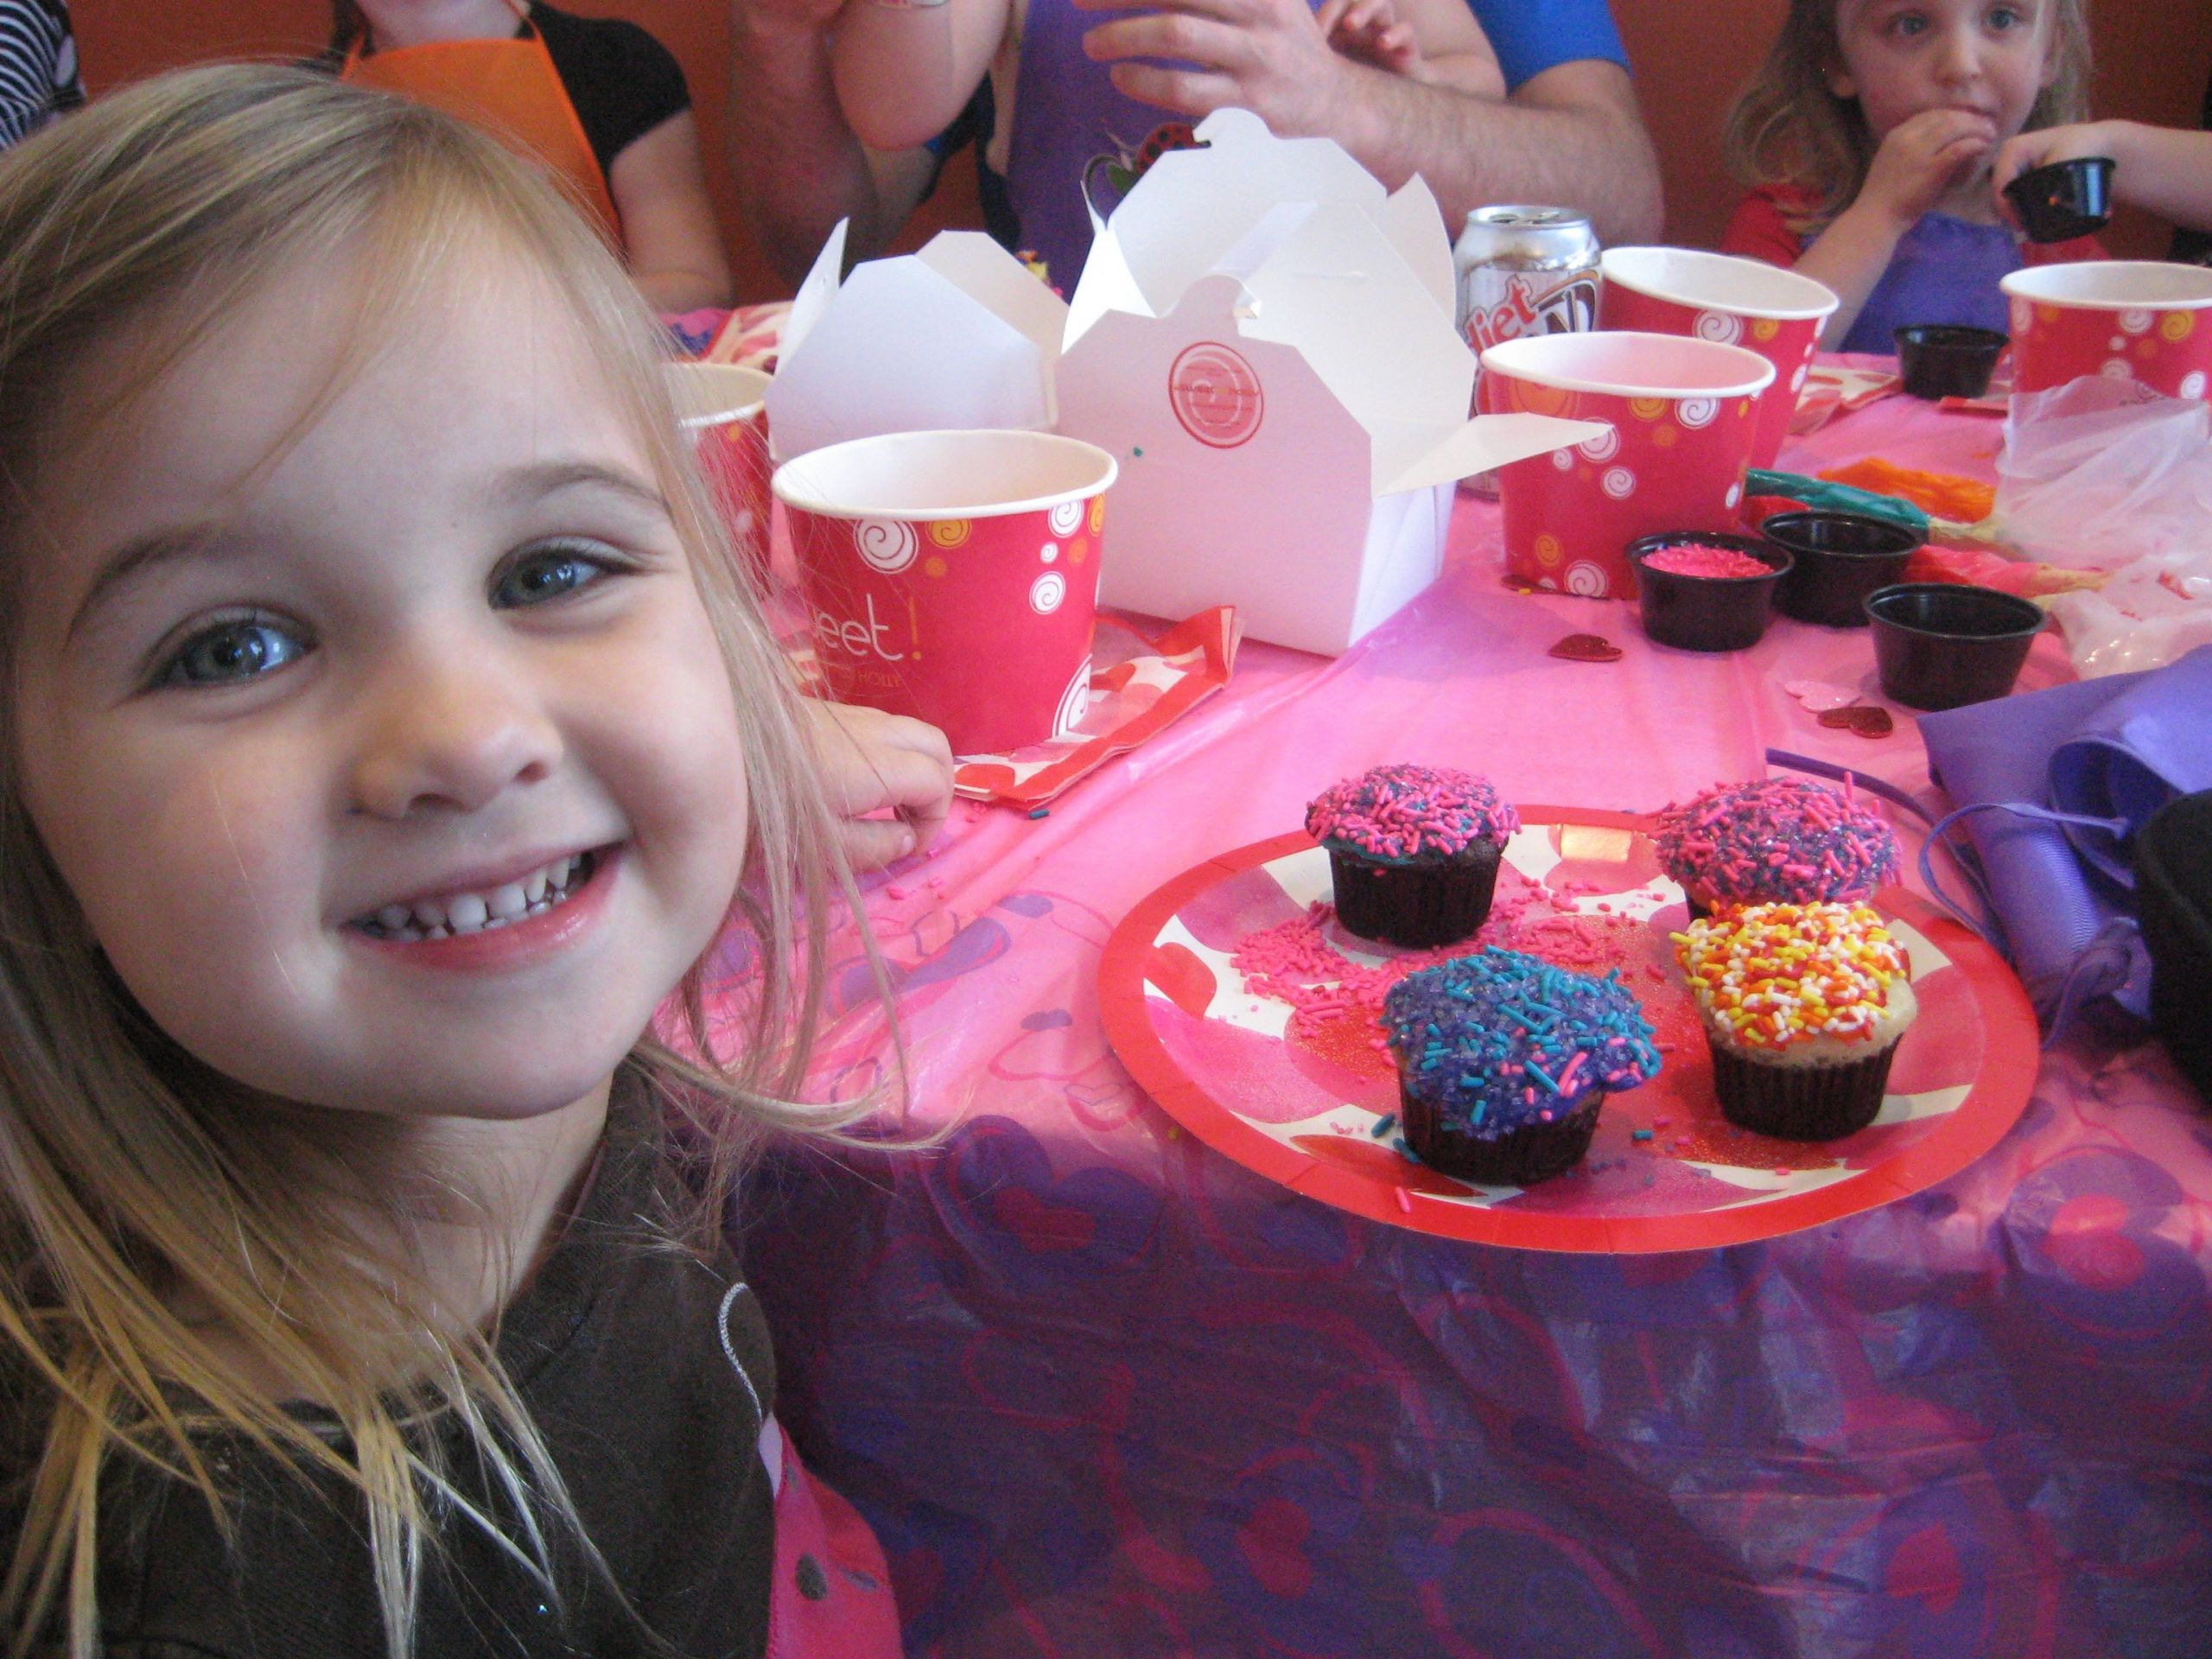 Kids Birthday Party Places Jacksonville Fl
 Best Birthday Party Venues in Jacksonville FL